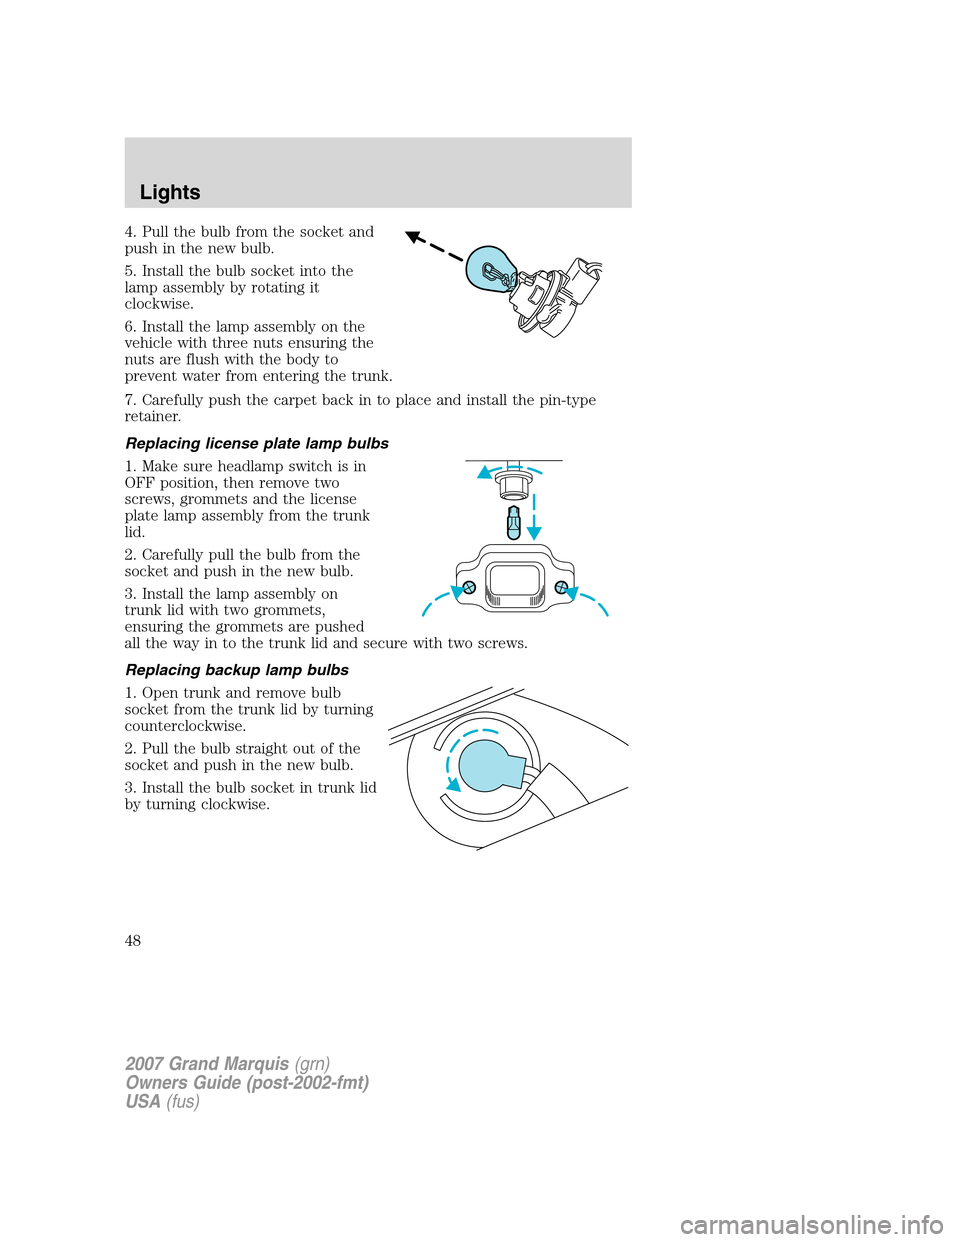 Mercury Grand Marquis 2007  s Service Manual 4. Pull the bulb from the socket and
push in the new bulb.
5. Install the bulb socket into the
lamp assembly by rotating it
clockwise.
6. Install the lamp assembly on the
vehicle with three nuts ensur